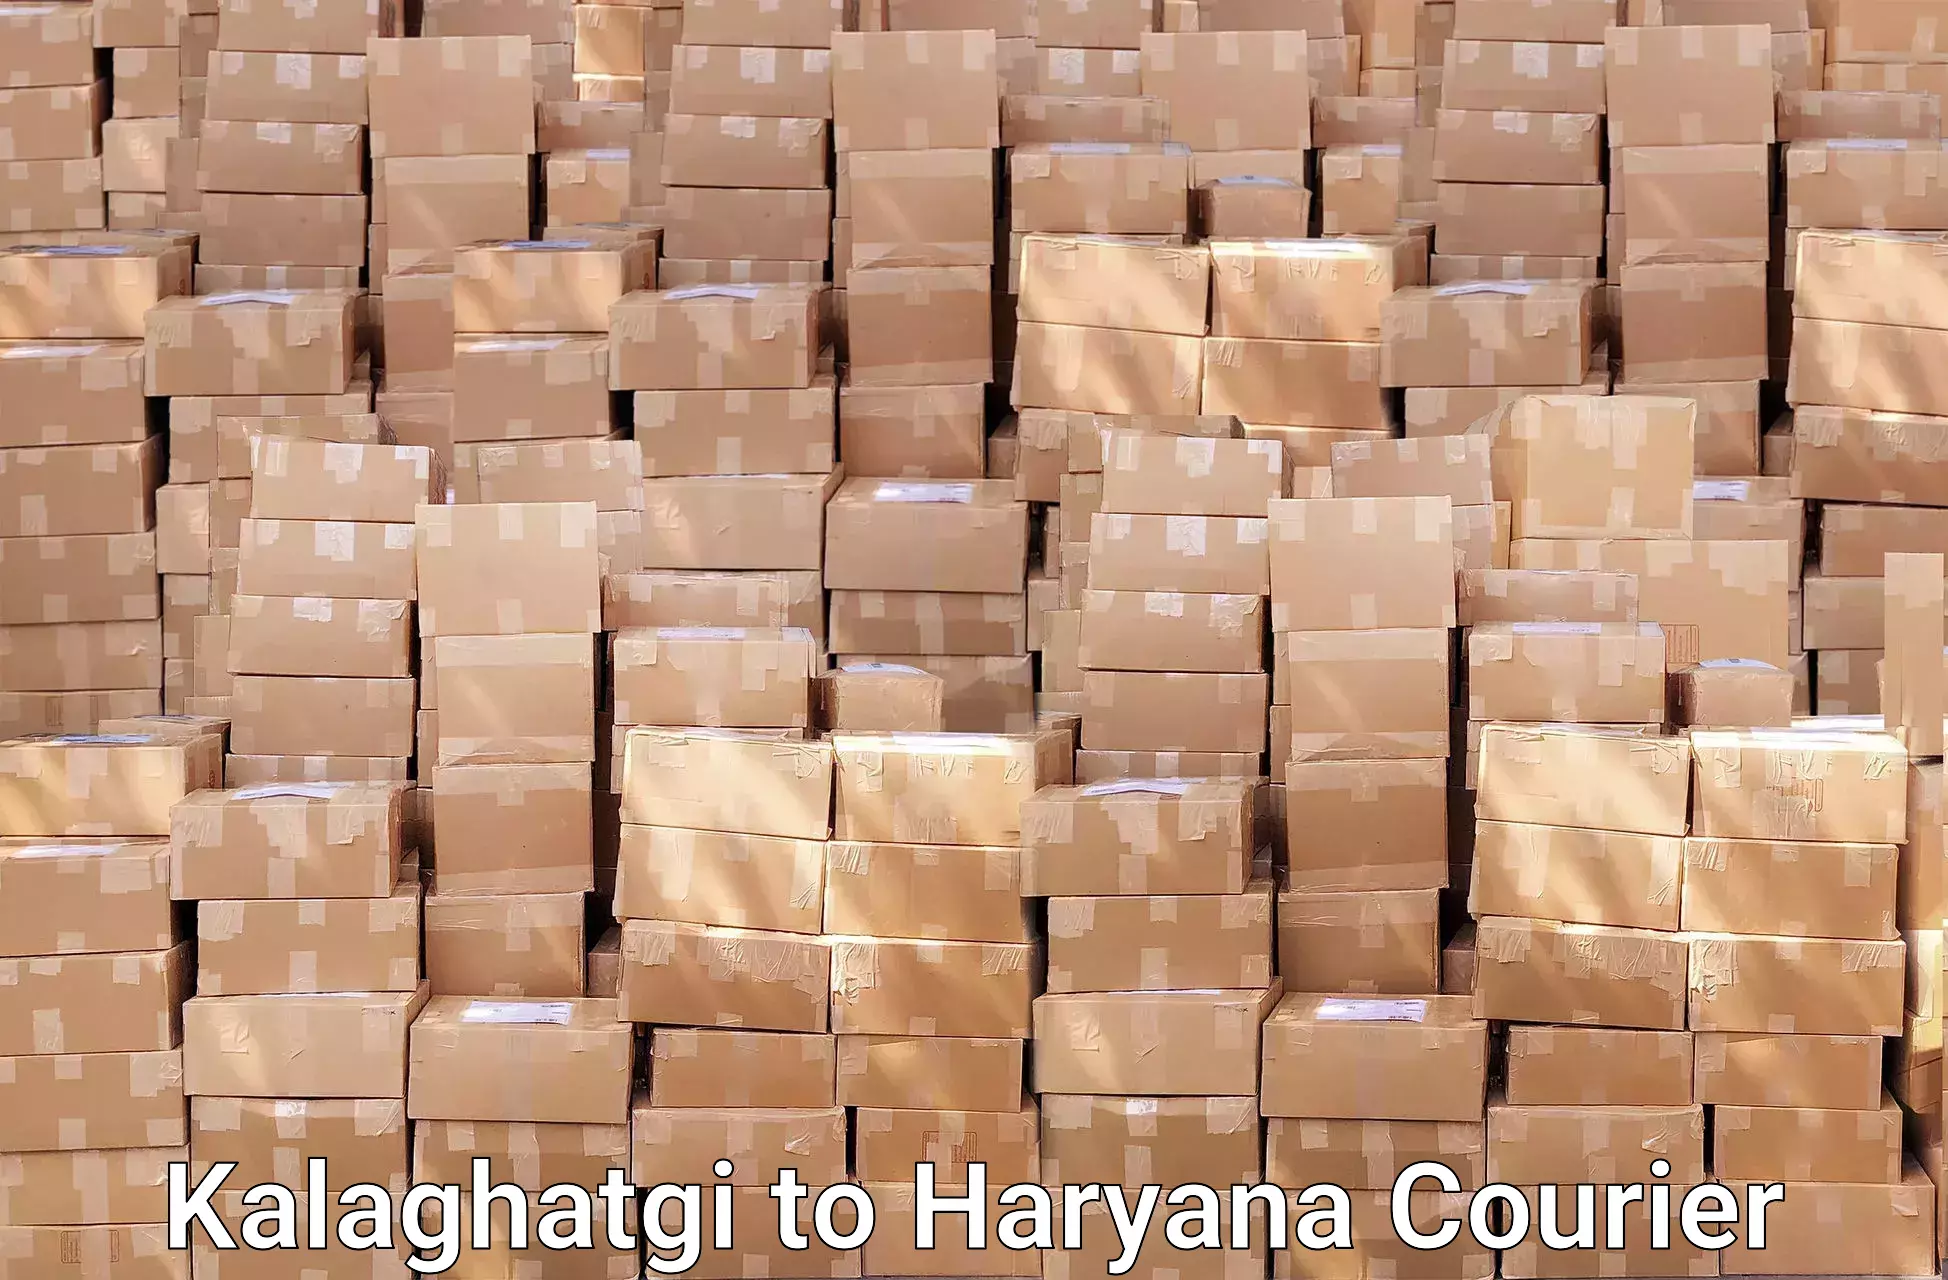 Personalized relocation plans Kalaghatgi to NCR Haryana